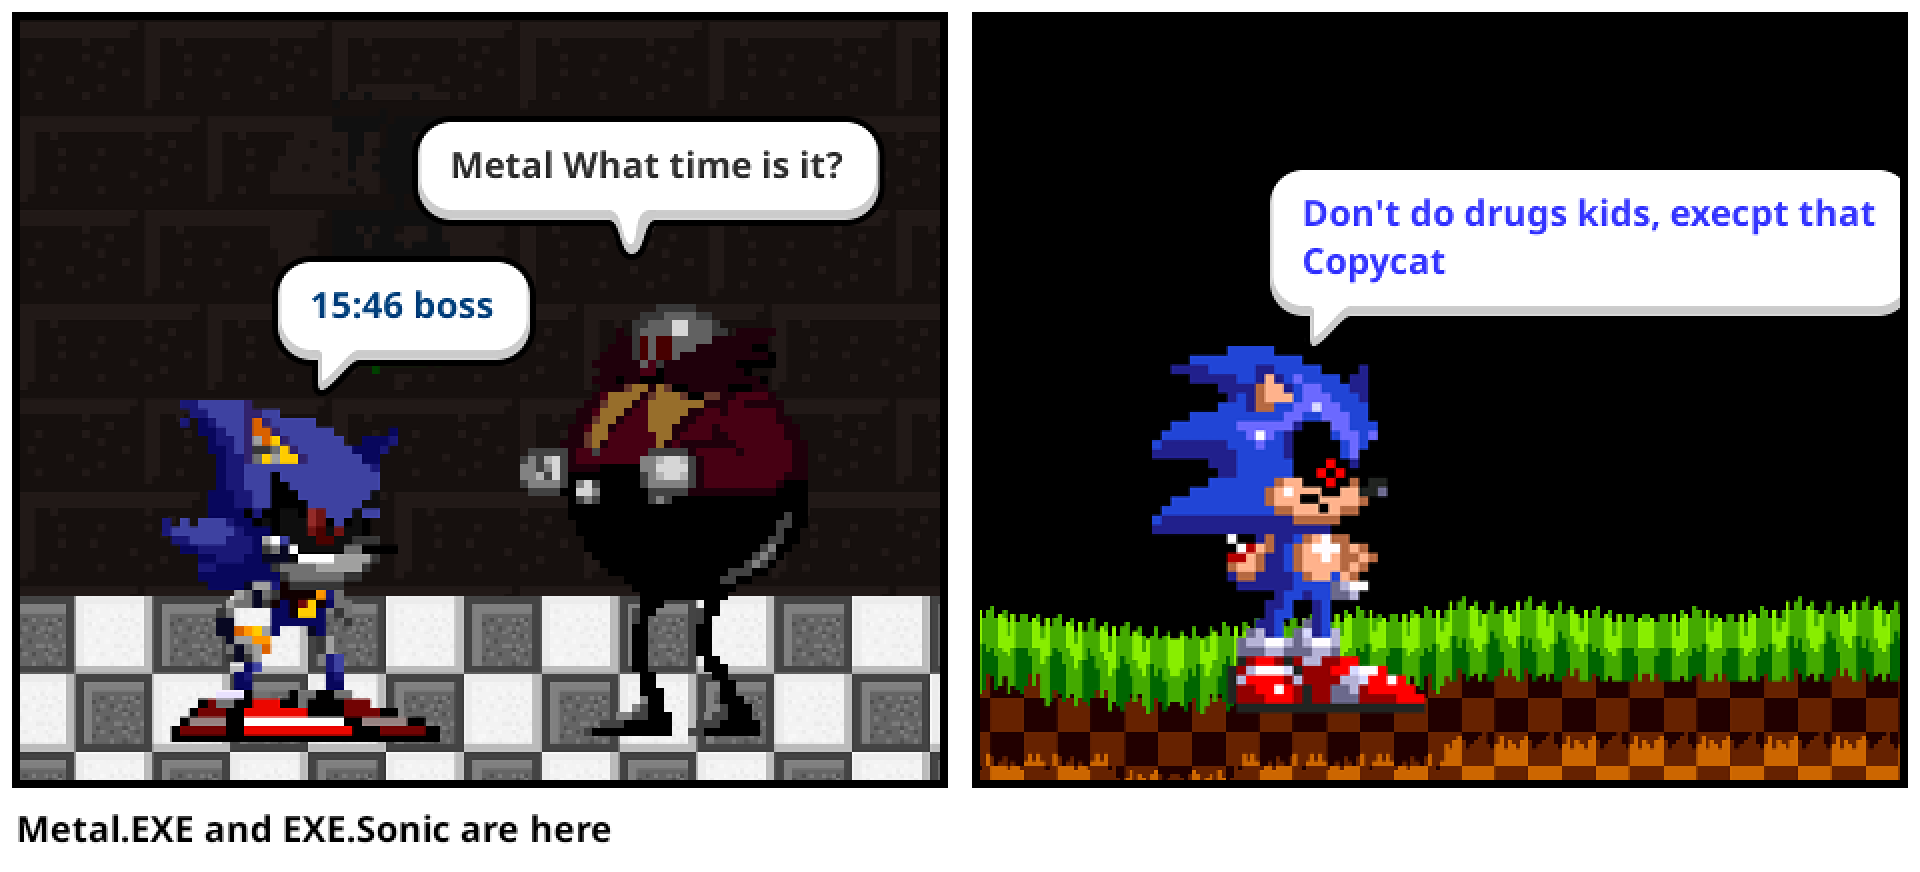 Metal.EXE and EXE.Sonic are here